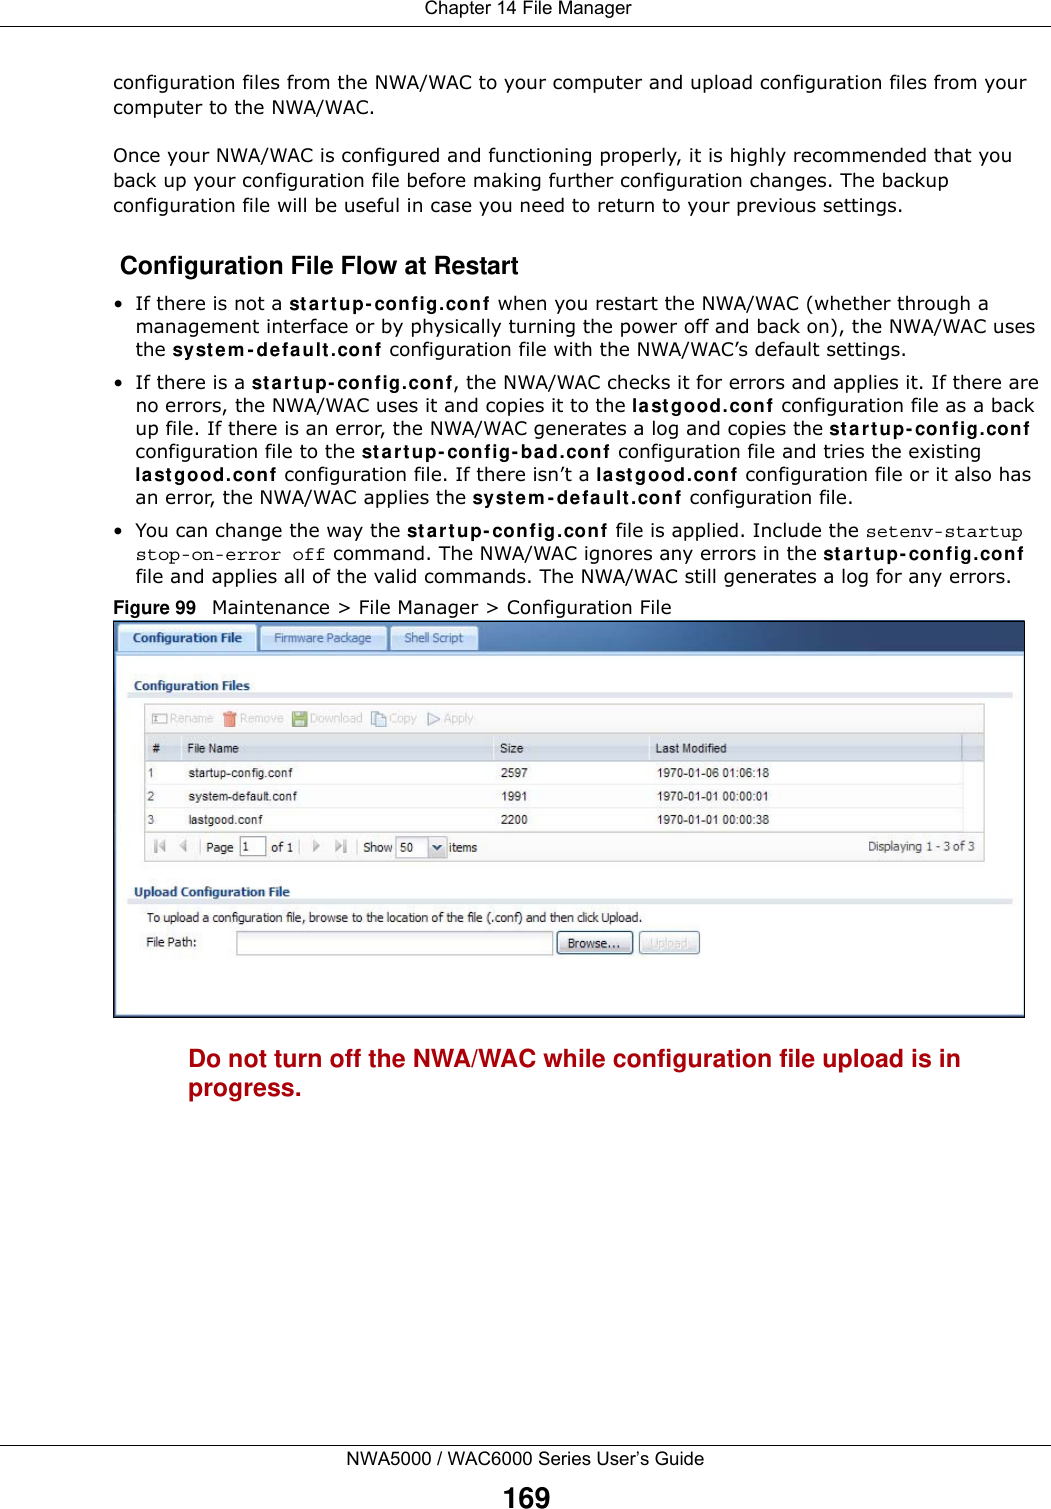  Chapter 14 File ManagerNWA5000 / WAC6000 Series User’s Guide169configuration files from the NWA/WAC to your computer and upload configuration files from your computer to the NWA/WAC.Once your NWA/WAC is configured and functioning properly, it is highly recommended that you back up your configuration file before making further configuration changes. The backup configuration file will be useful in case you need to return to your previous settings. Configuration File Flow at Restart• If there is not a st ar t up- config.conf when you restart the NWA/WAC (whether through a management interface or by physically turning the power off and back on), the NWA/WAC uses the sy st e m - d efa ult . conf configuration file with the NWA/WAC’s default settings.•If there is a st a r t up- config .co nf, the NWA/WAC checks it for errors and applies it. If there are no errors, the NWA/WAC uses it and copies it to the la st g ood.con f configuration file as a back up file. If there is an error, the NWA/WAC generates a log and copies the st a rt up- config.con f configuration file to the st a r t up- config - ba d.con f configuration file and tries the existing la st g ood.conf configuration file. If there isn’t a last g ood.con f configuration file or it also has an error, the NWA/WAC applies the sy st e m - d efa ult . conf configuration file.• You can change the way the st a rt up- config .conf  file is applied. Include the setenv-startup stop-on-error off command. The NWA/WAC ignores any errors in the st a r t u p- config .conf file and applies all of the valid commands. The NWA/WAC still generates a log for any errors. Figure 99   Maintenance &gt; File Manager &gt; Configuration File Do not turn off the NWA/WAC while configuration file upload is in progress.